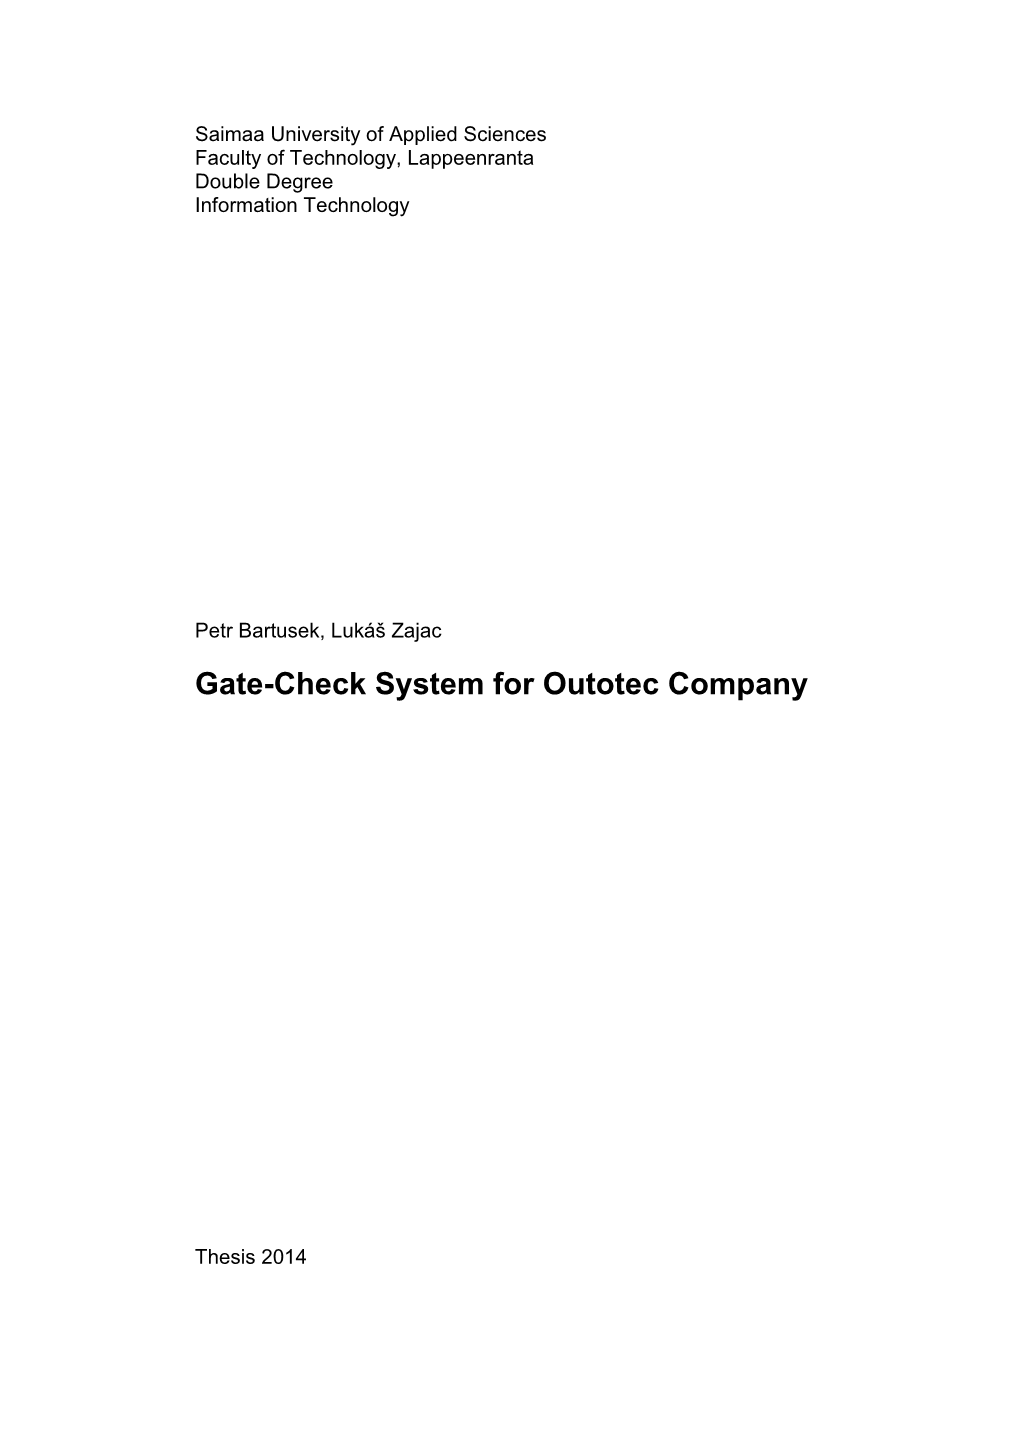 Gate-Check System for Outotec Company